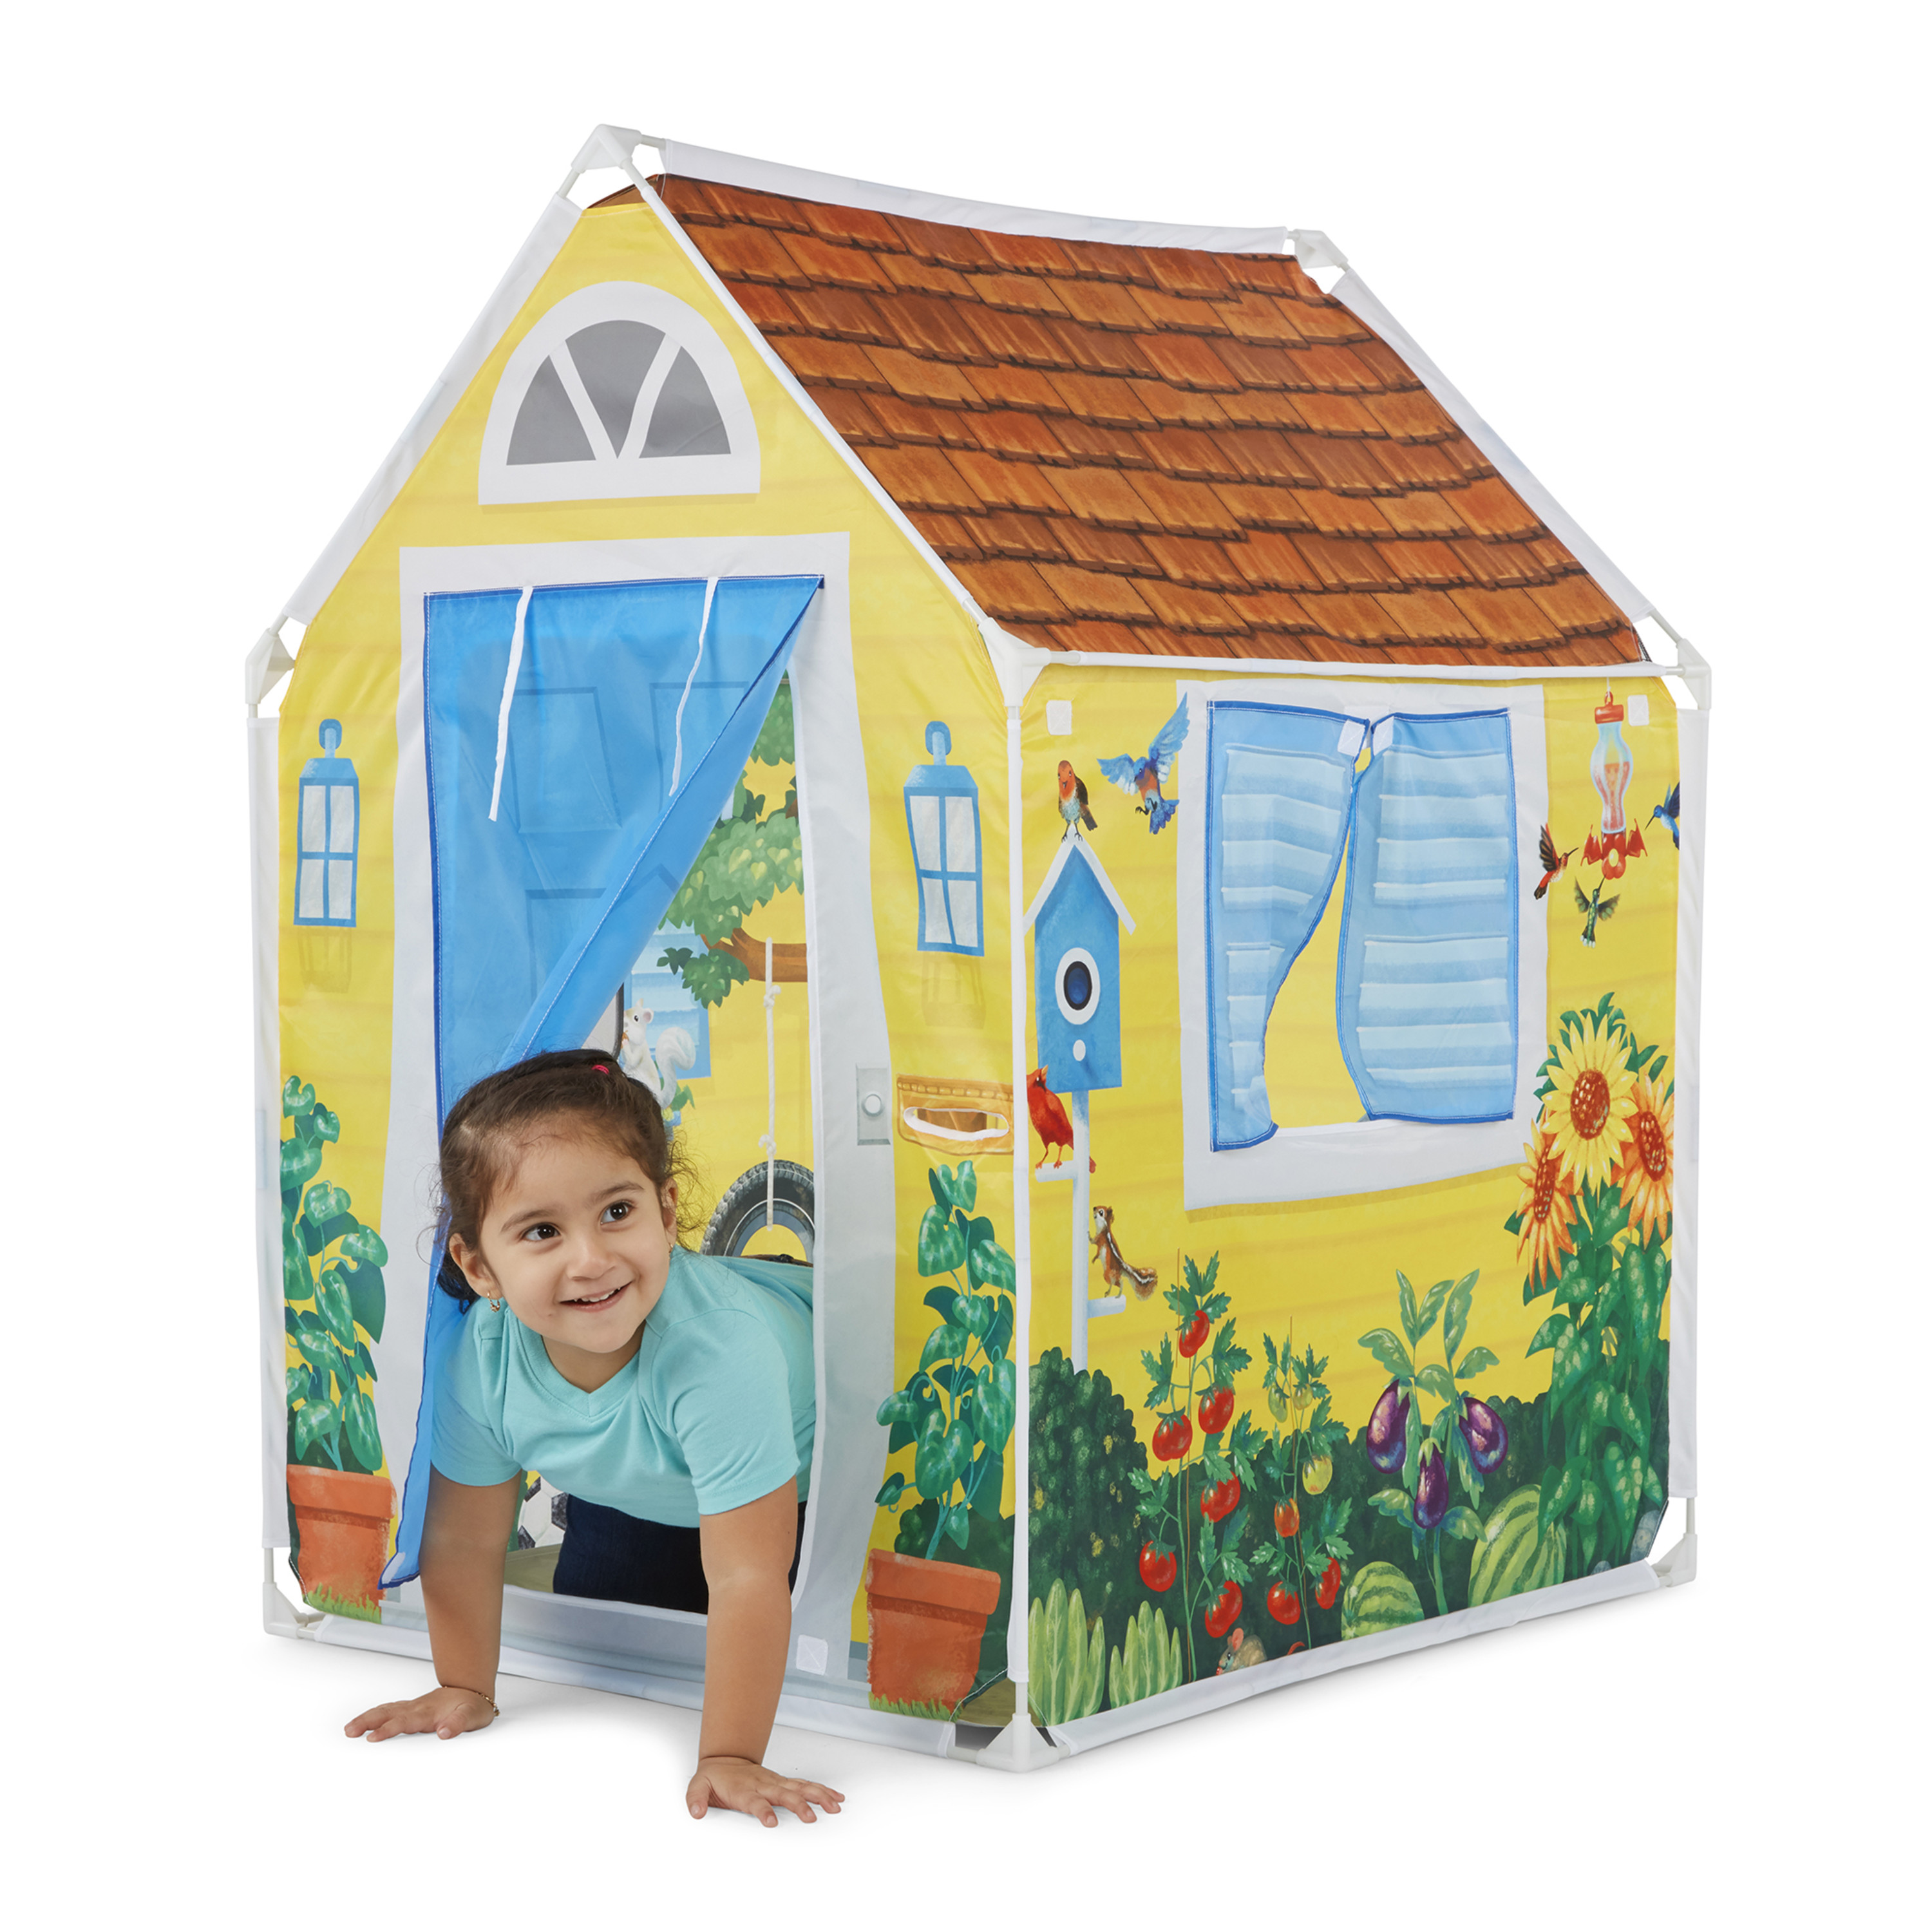 Melissa & Doug Cozy Cottage Fabric Play Tent and Storage Tote - $9.88